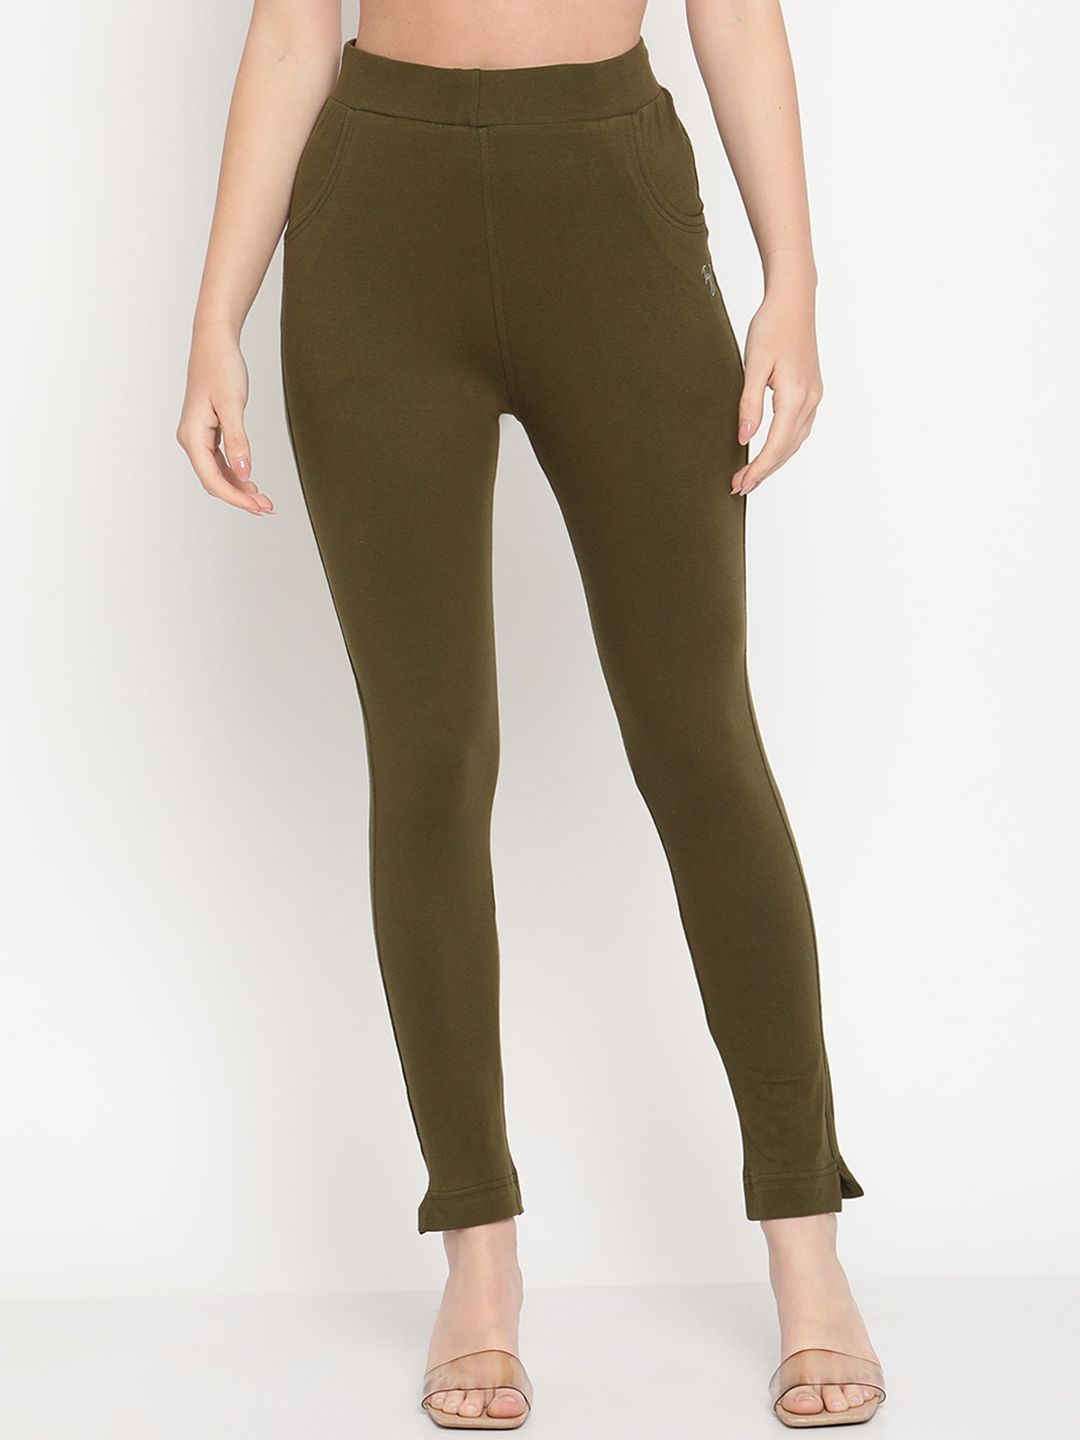 TAG 7 Women Olive Green Solid Ankle-Length Leggings Price in India